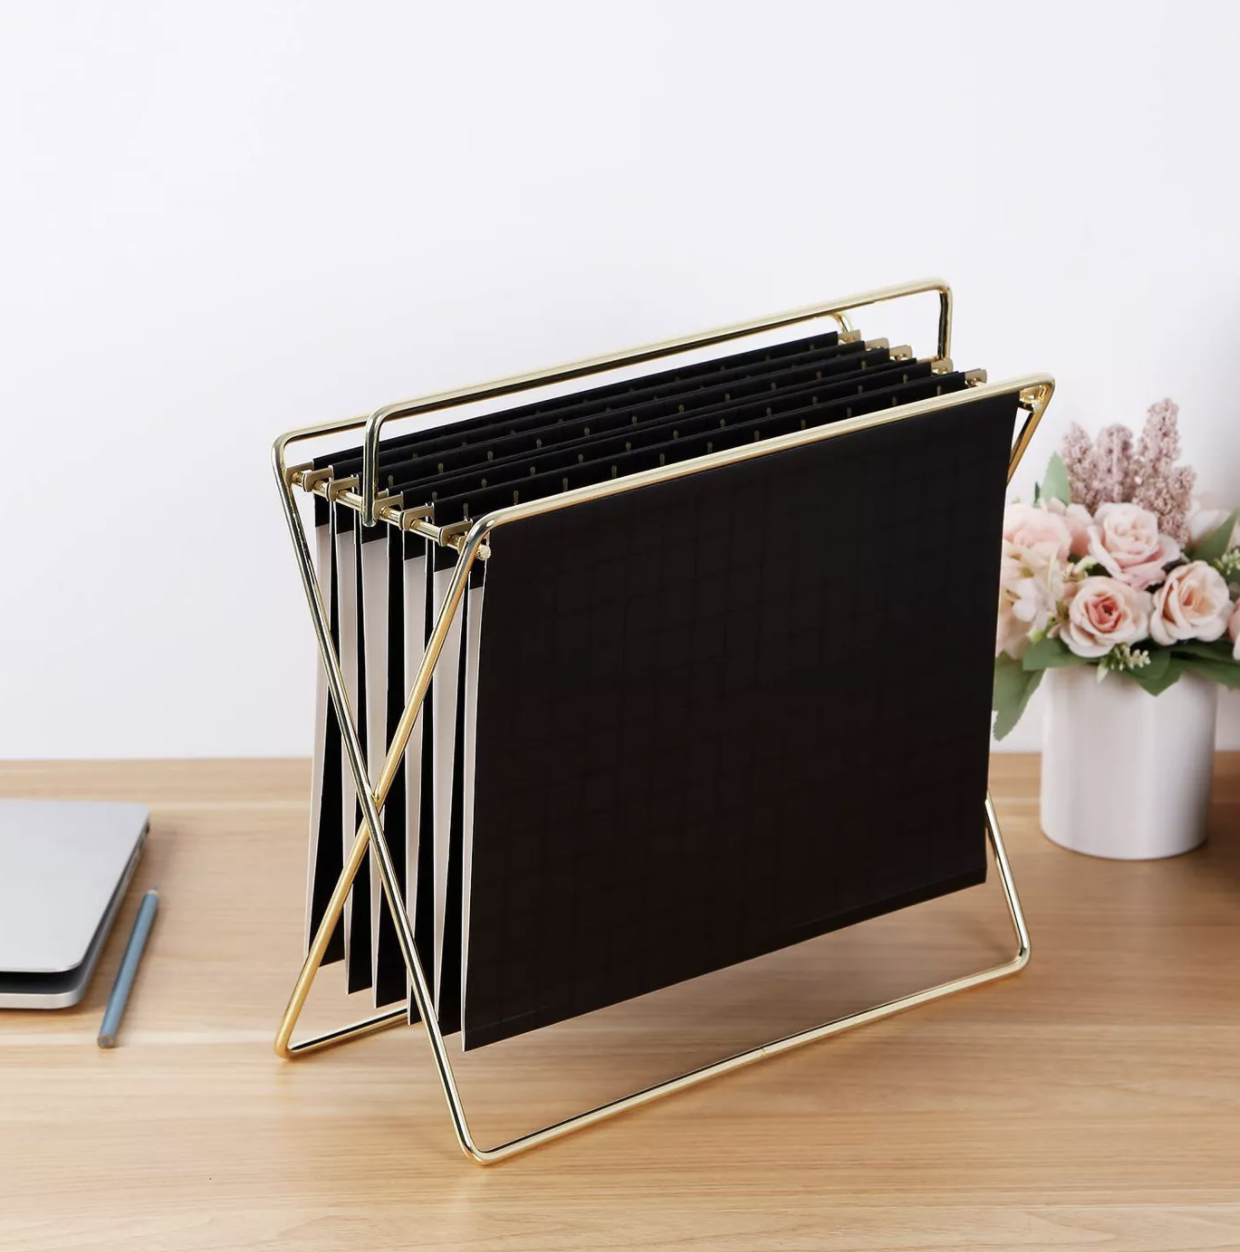 A gold standing file organizer.